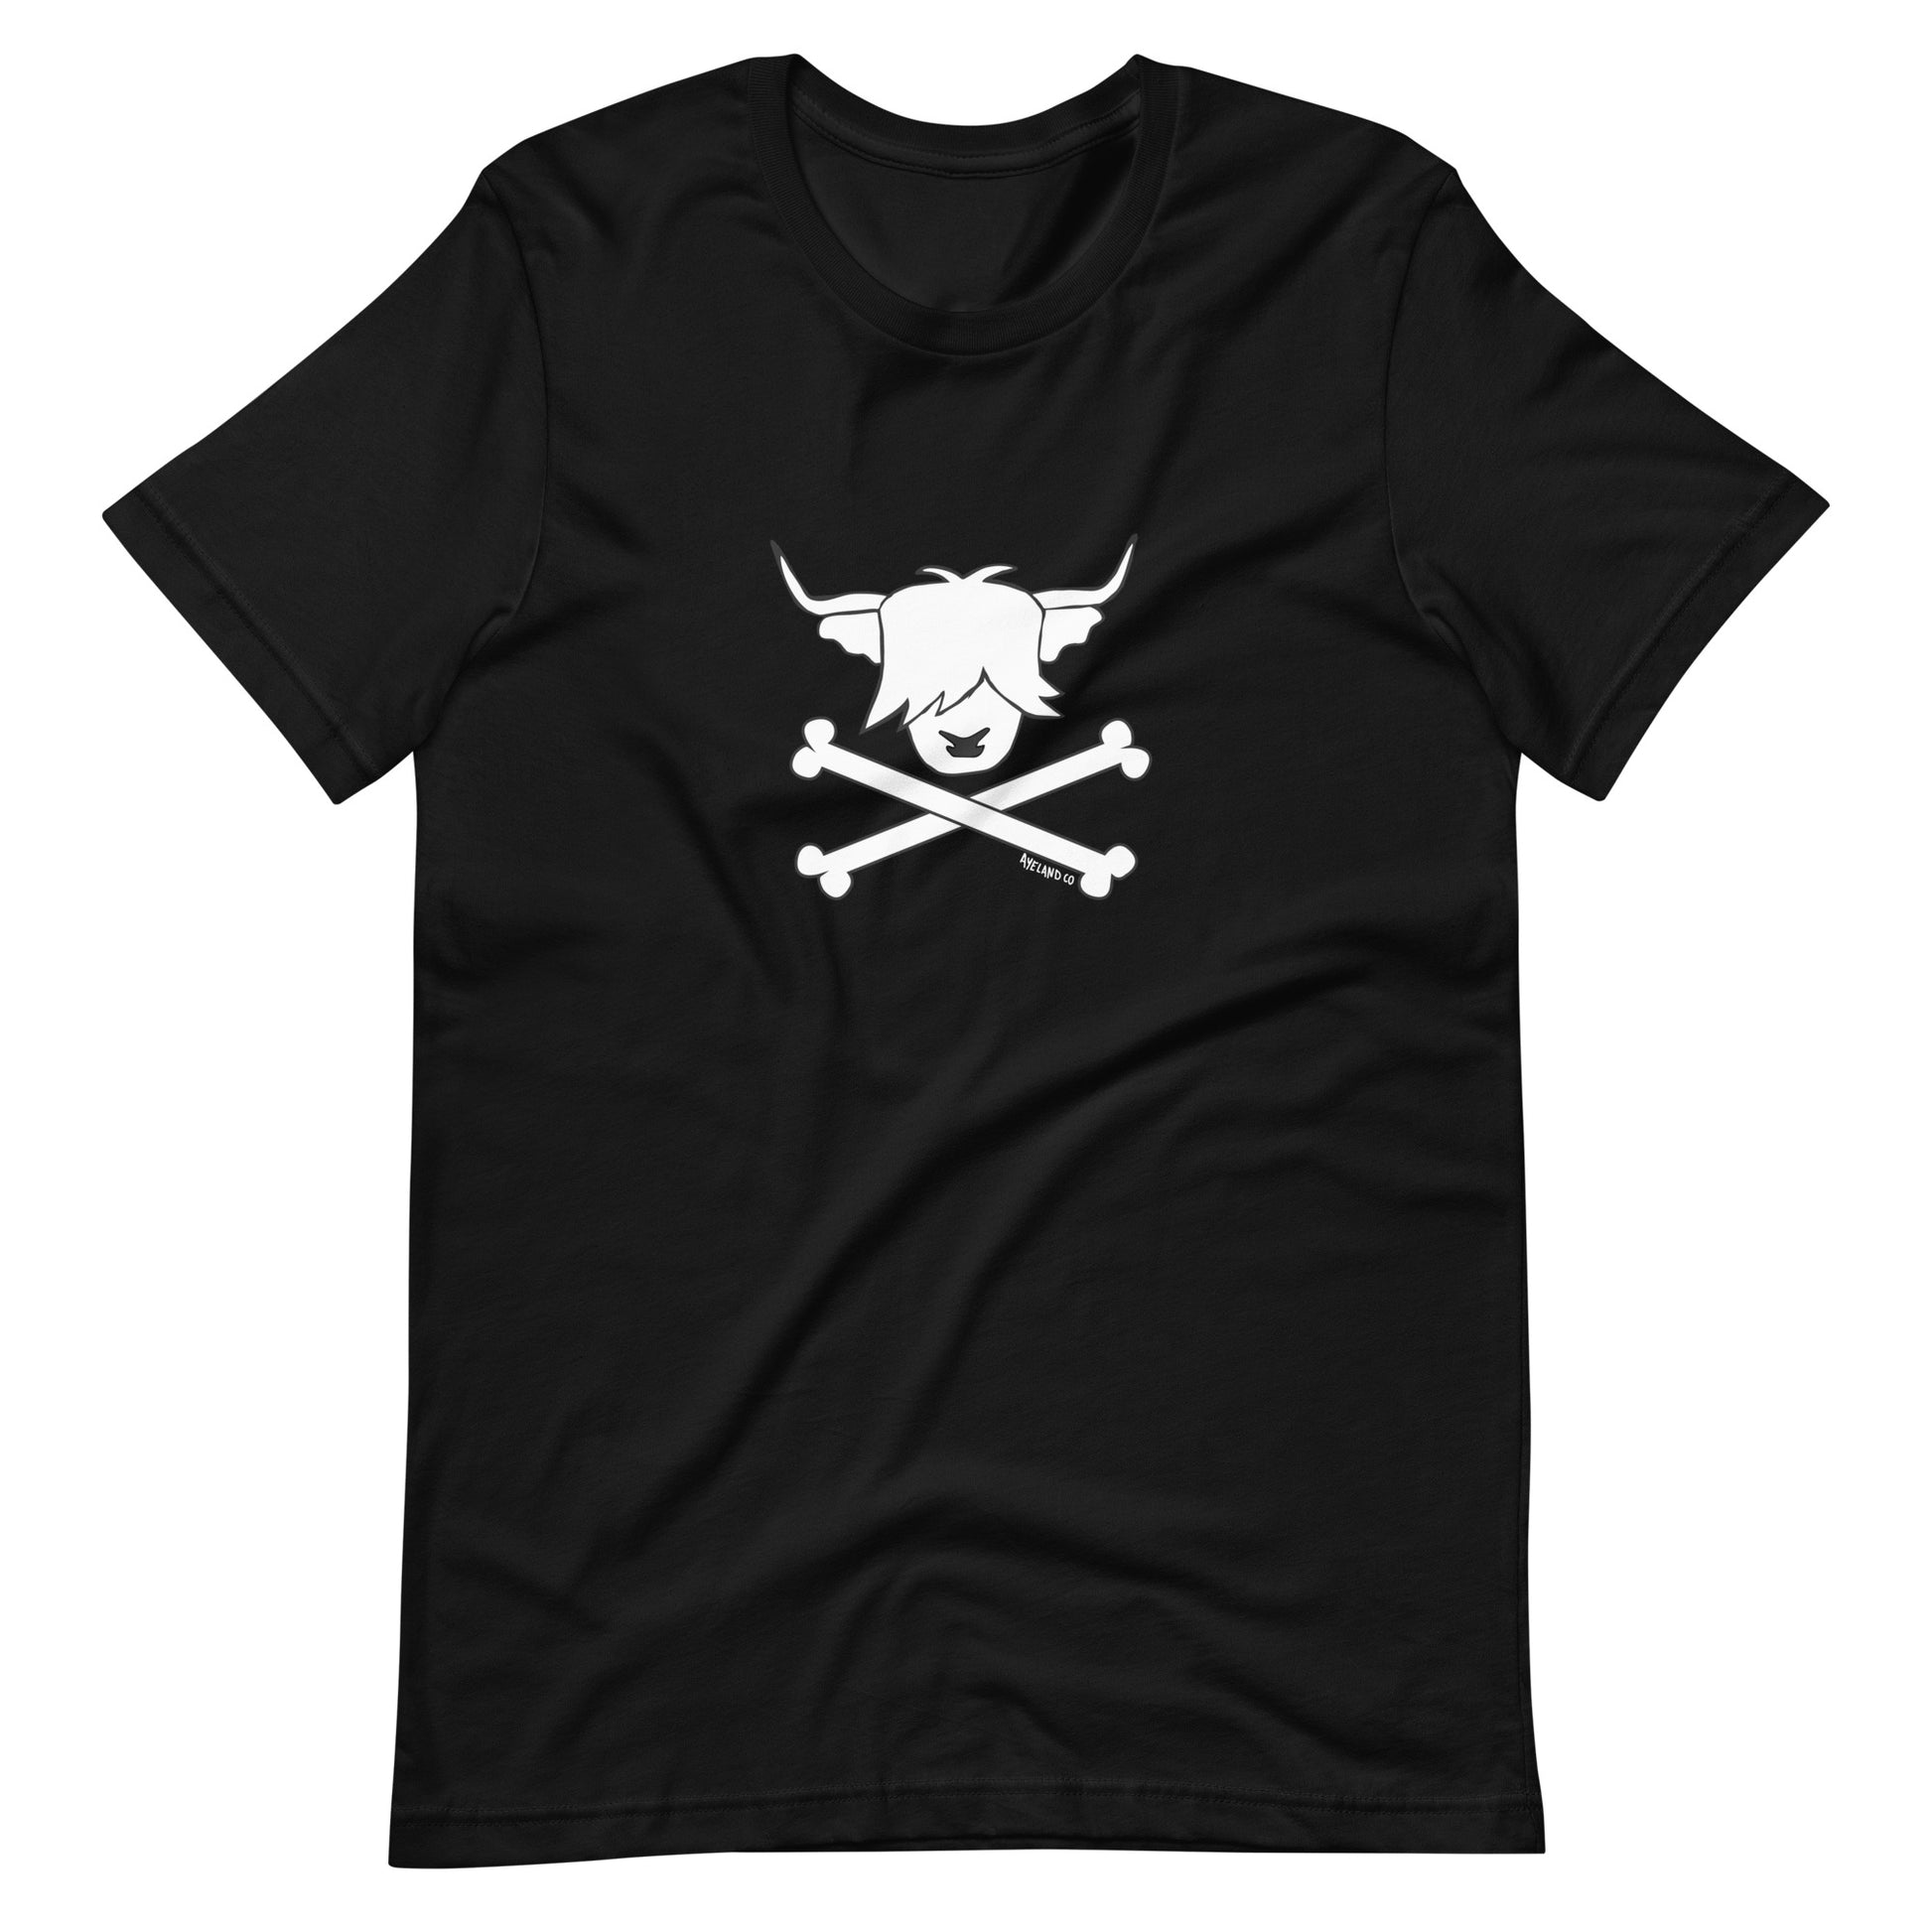 black tshirt with a pirate highland cow design on it